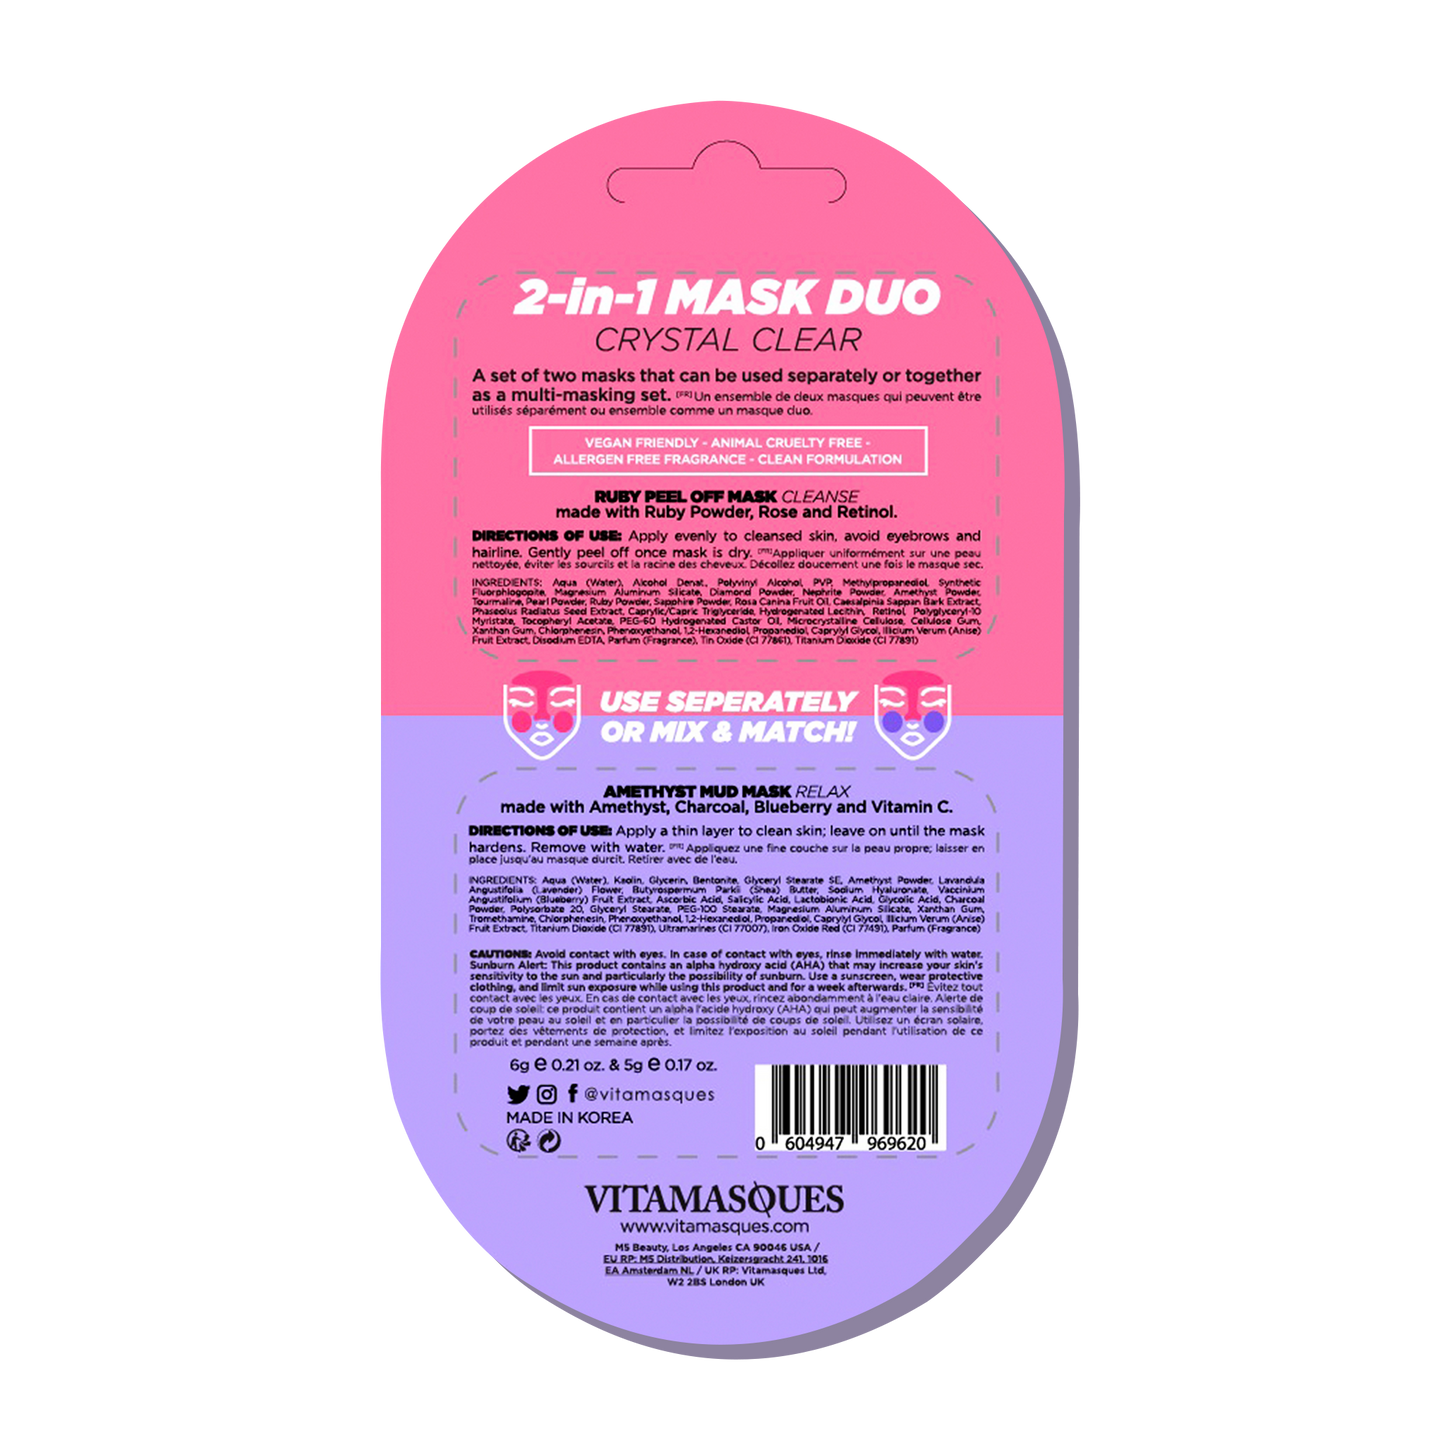 2-in-1 Mask Duo: Crystal Clear 2-in-1 Mask